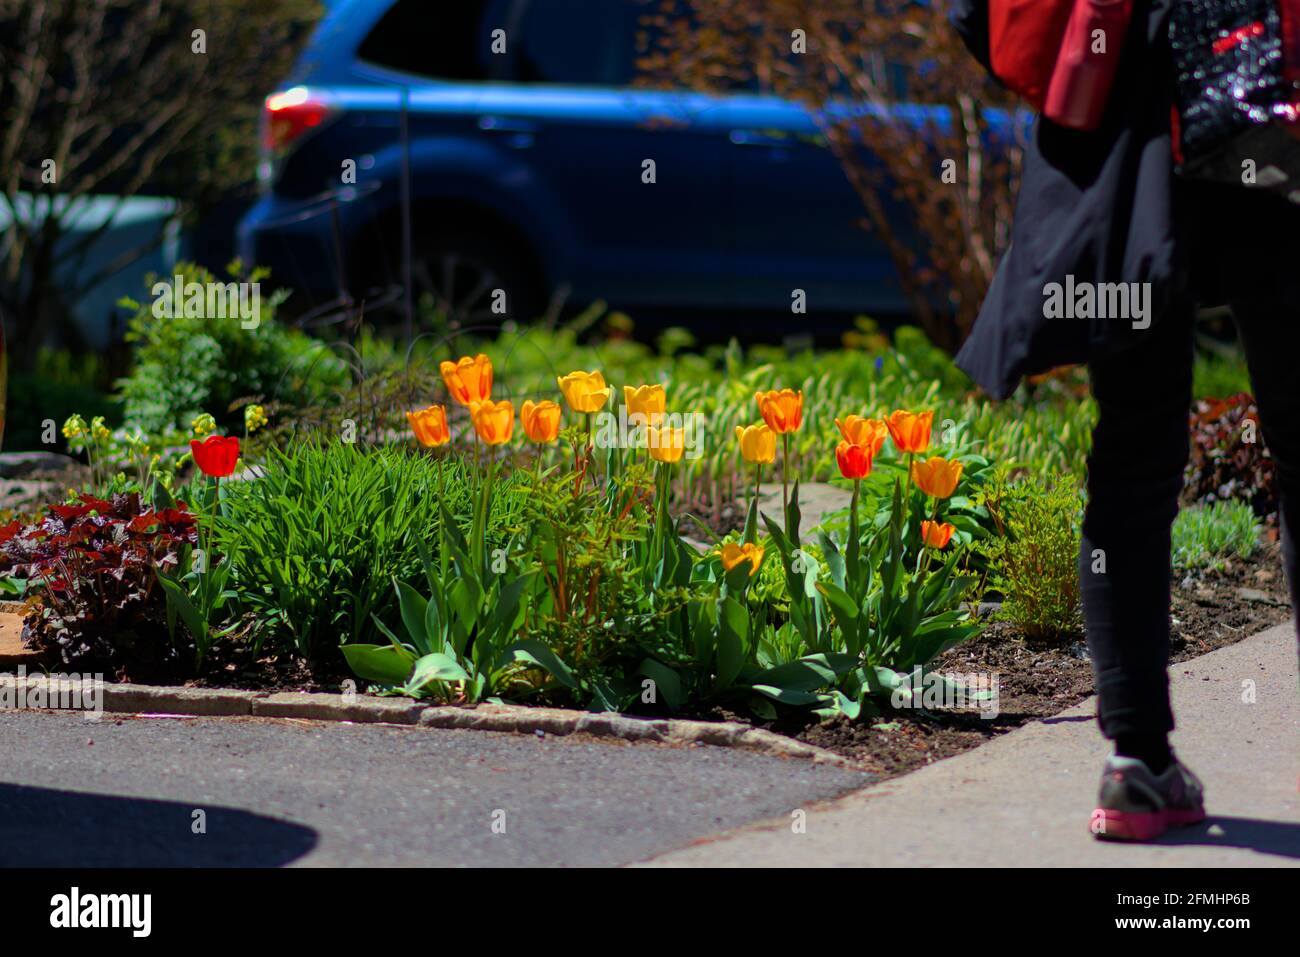 A person walks past some tulips (unknown cultivar) blooming in a Glebe garden in late spring in Ottawa, Ontario, Canada. Stock Photo